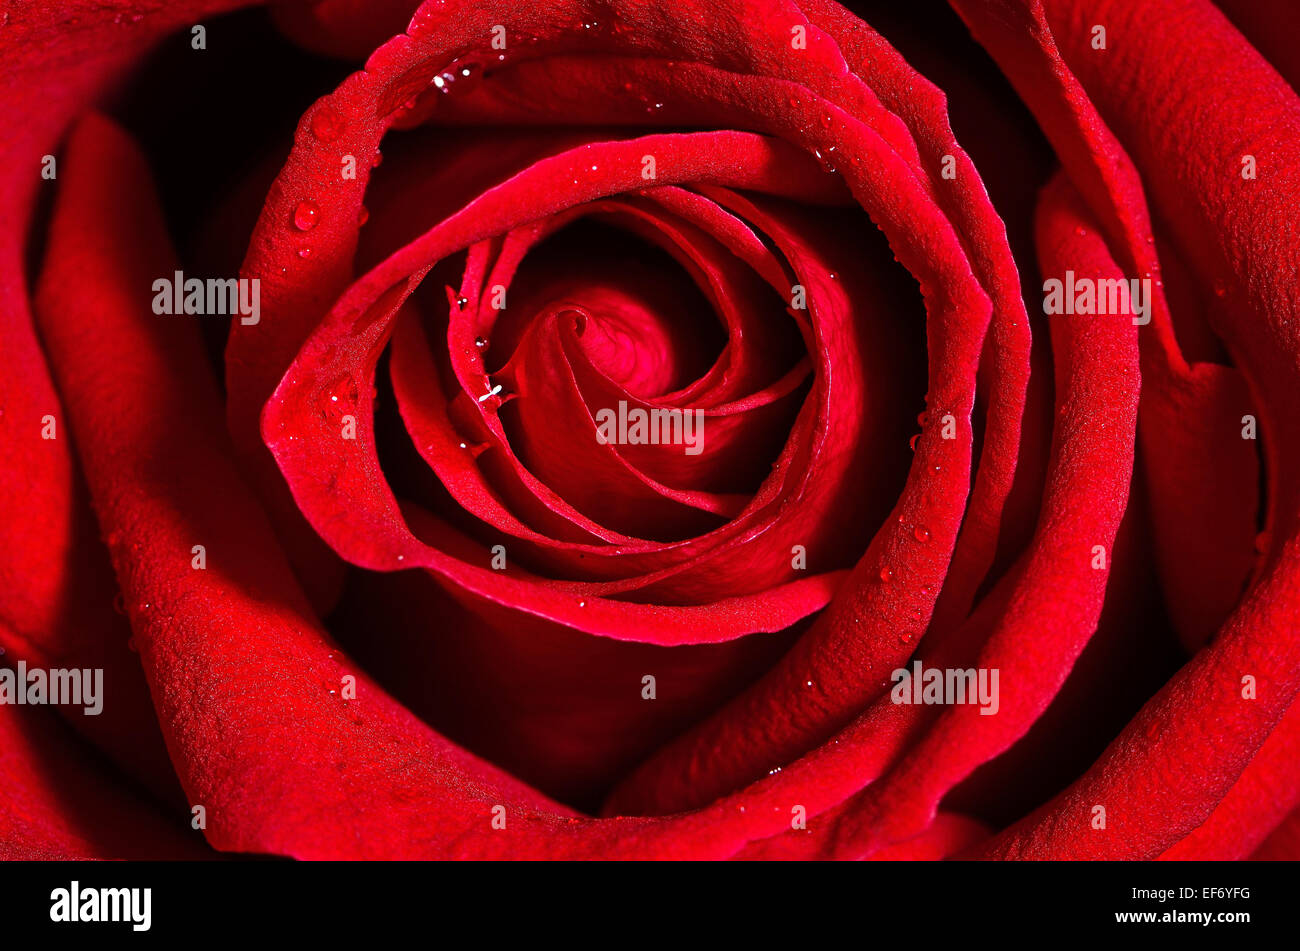 Closeup red rose background pattern Stock Photo